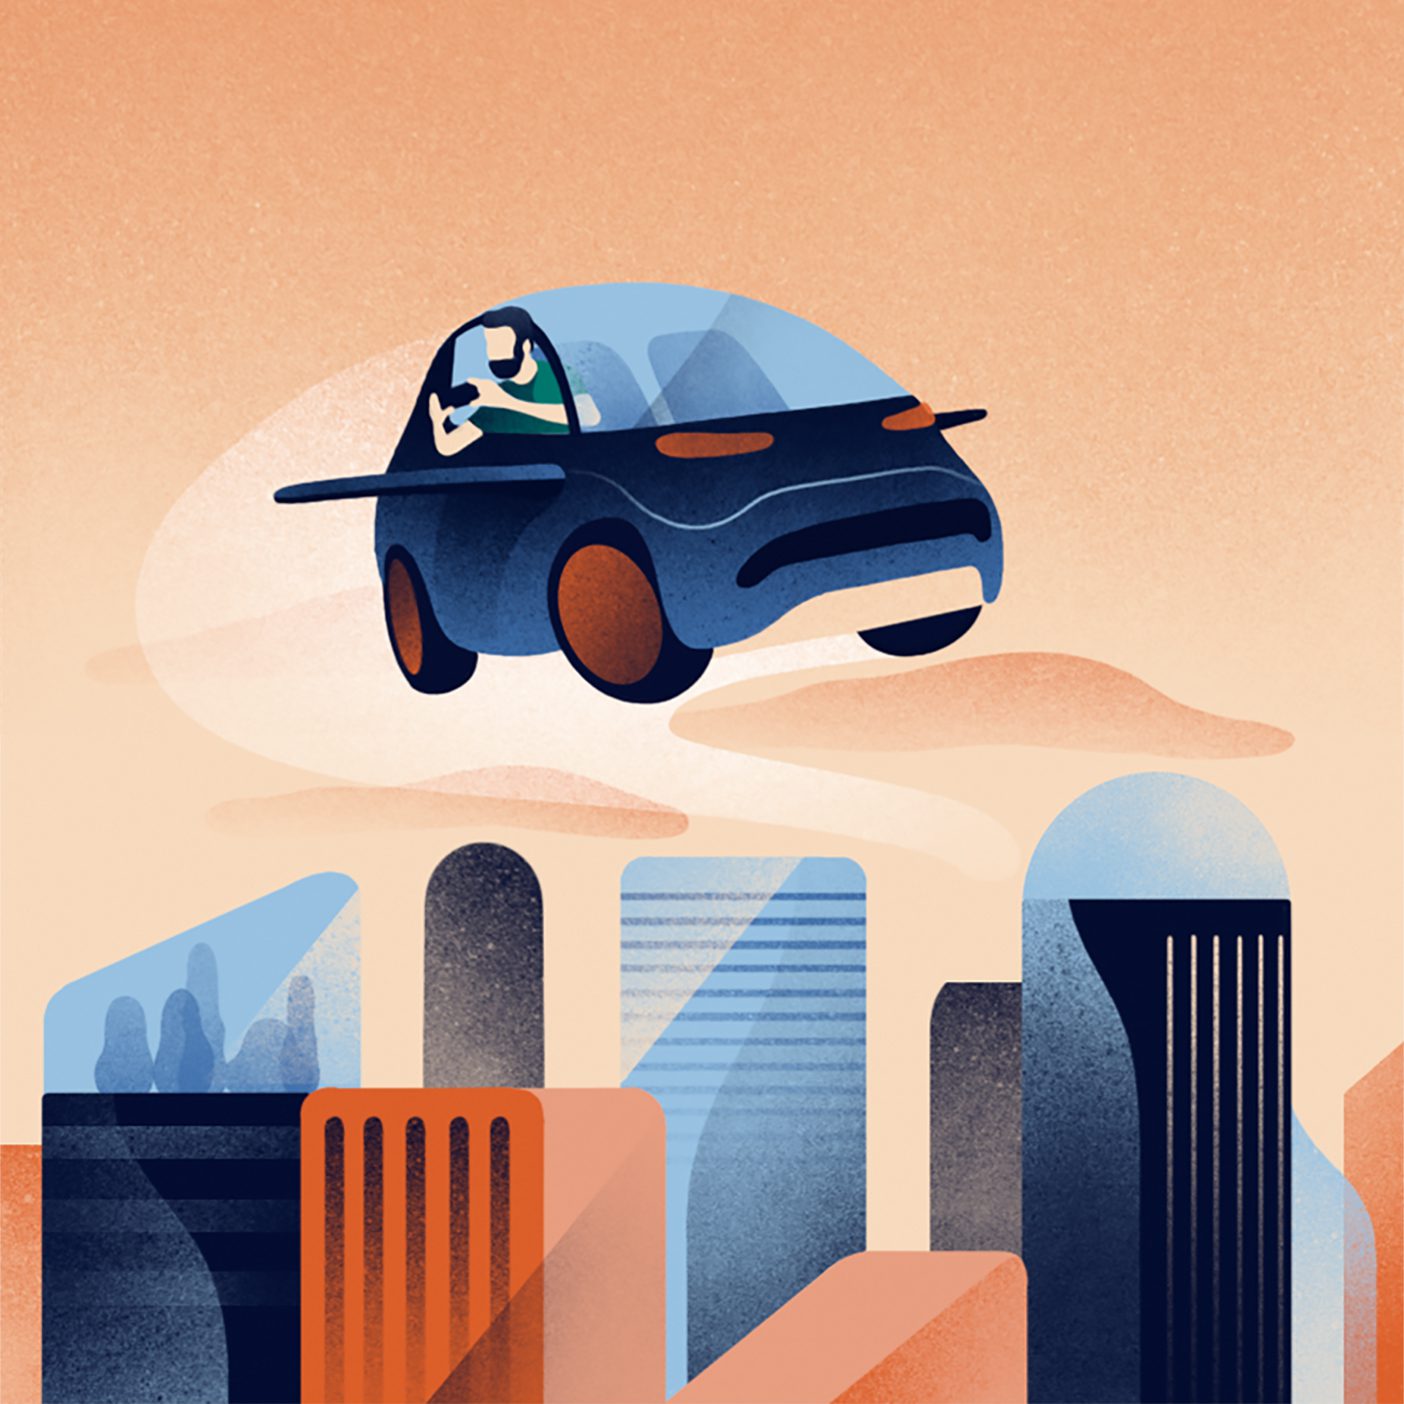 An illustration of a flying car over a city